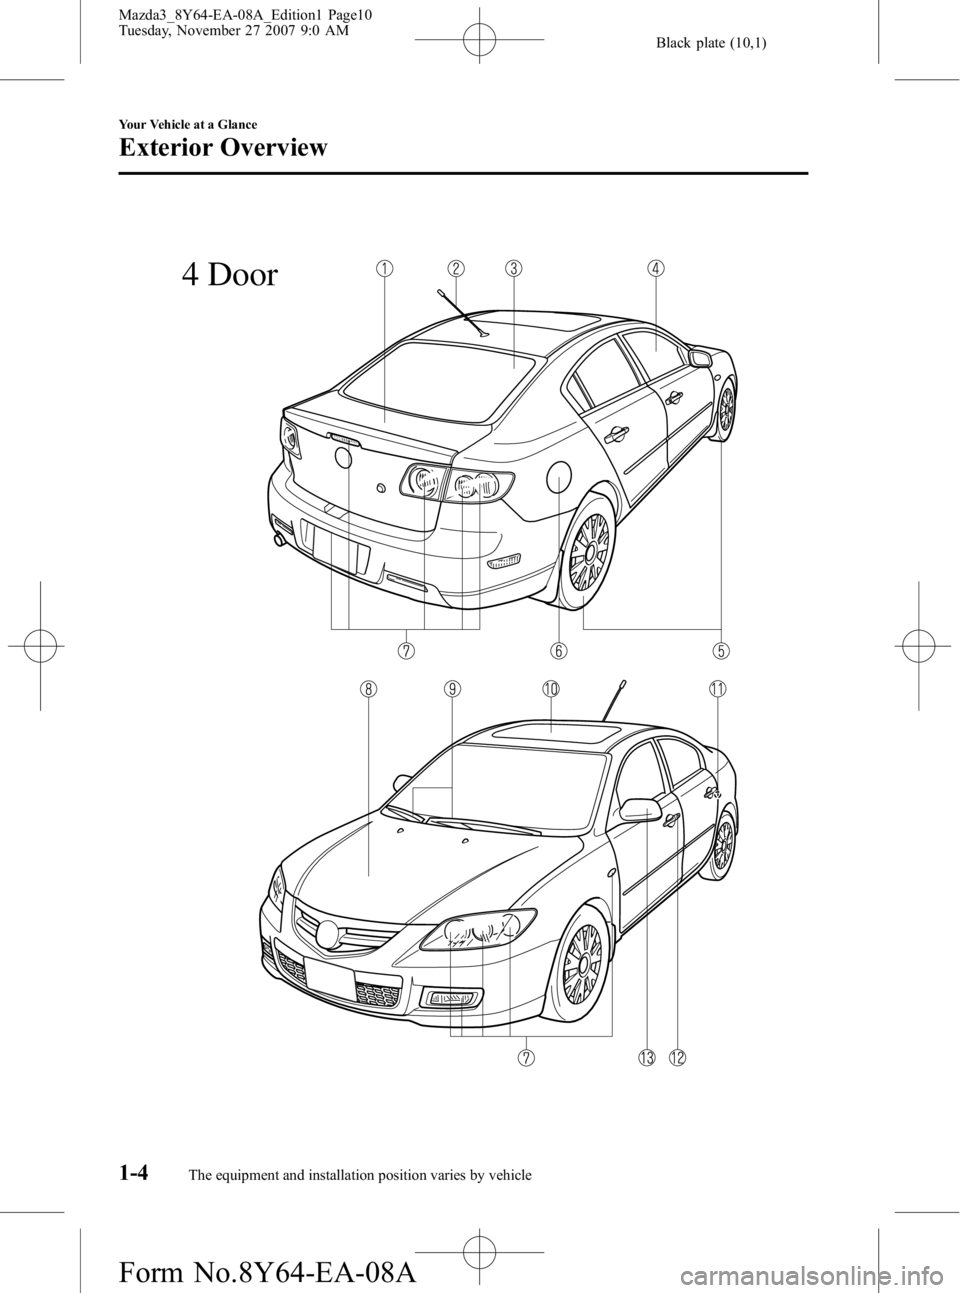 MAZDA MODEL 3 5-DOOR 2008  Owners Manual Black plate (10,1)
4 Door
1-4
Your Vehicle at a Glance
The equipment and installation position varies by vehicle
Exterior Overview
Mazda3_8Y64-EA-08A_Edition1 Page10
Tuesday, November 27 2007 9:0 AM
F